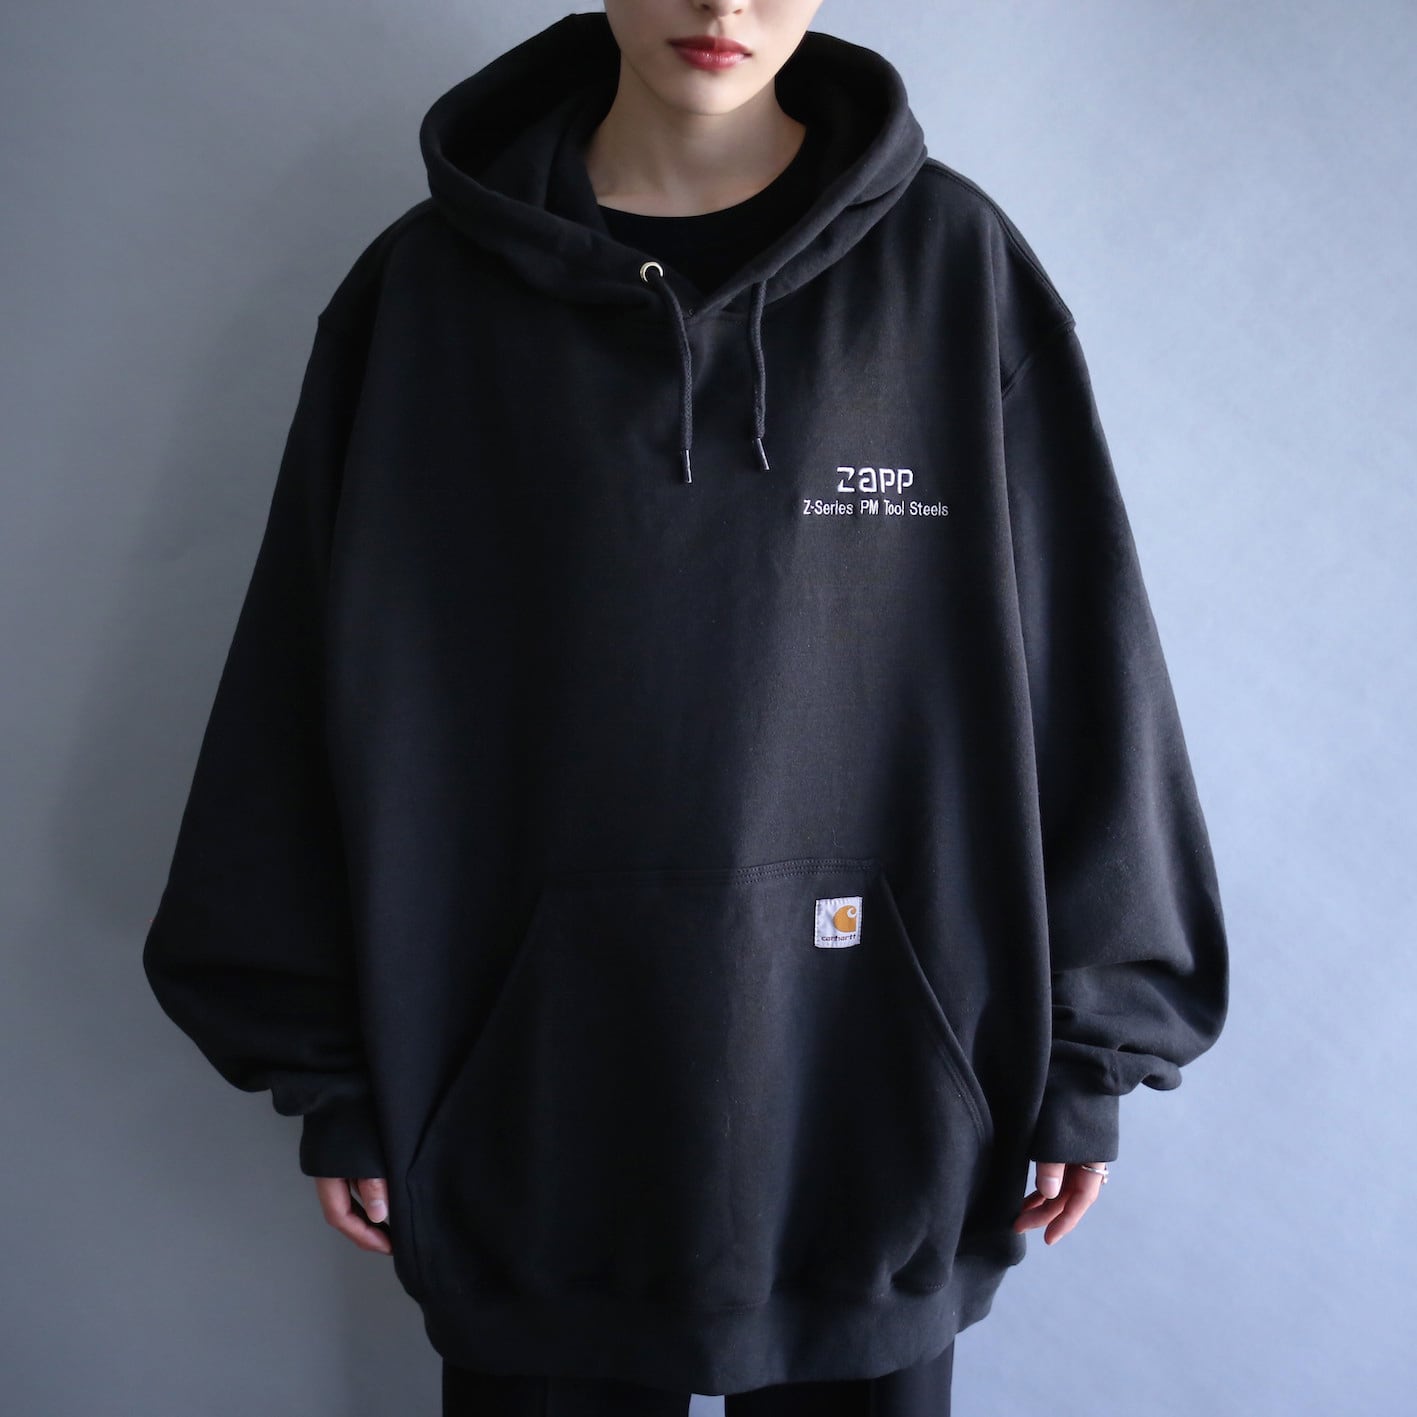 "Carhartt" one point embroidery over size black sweat parka